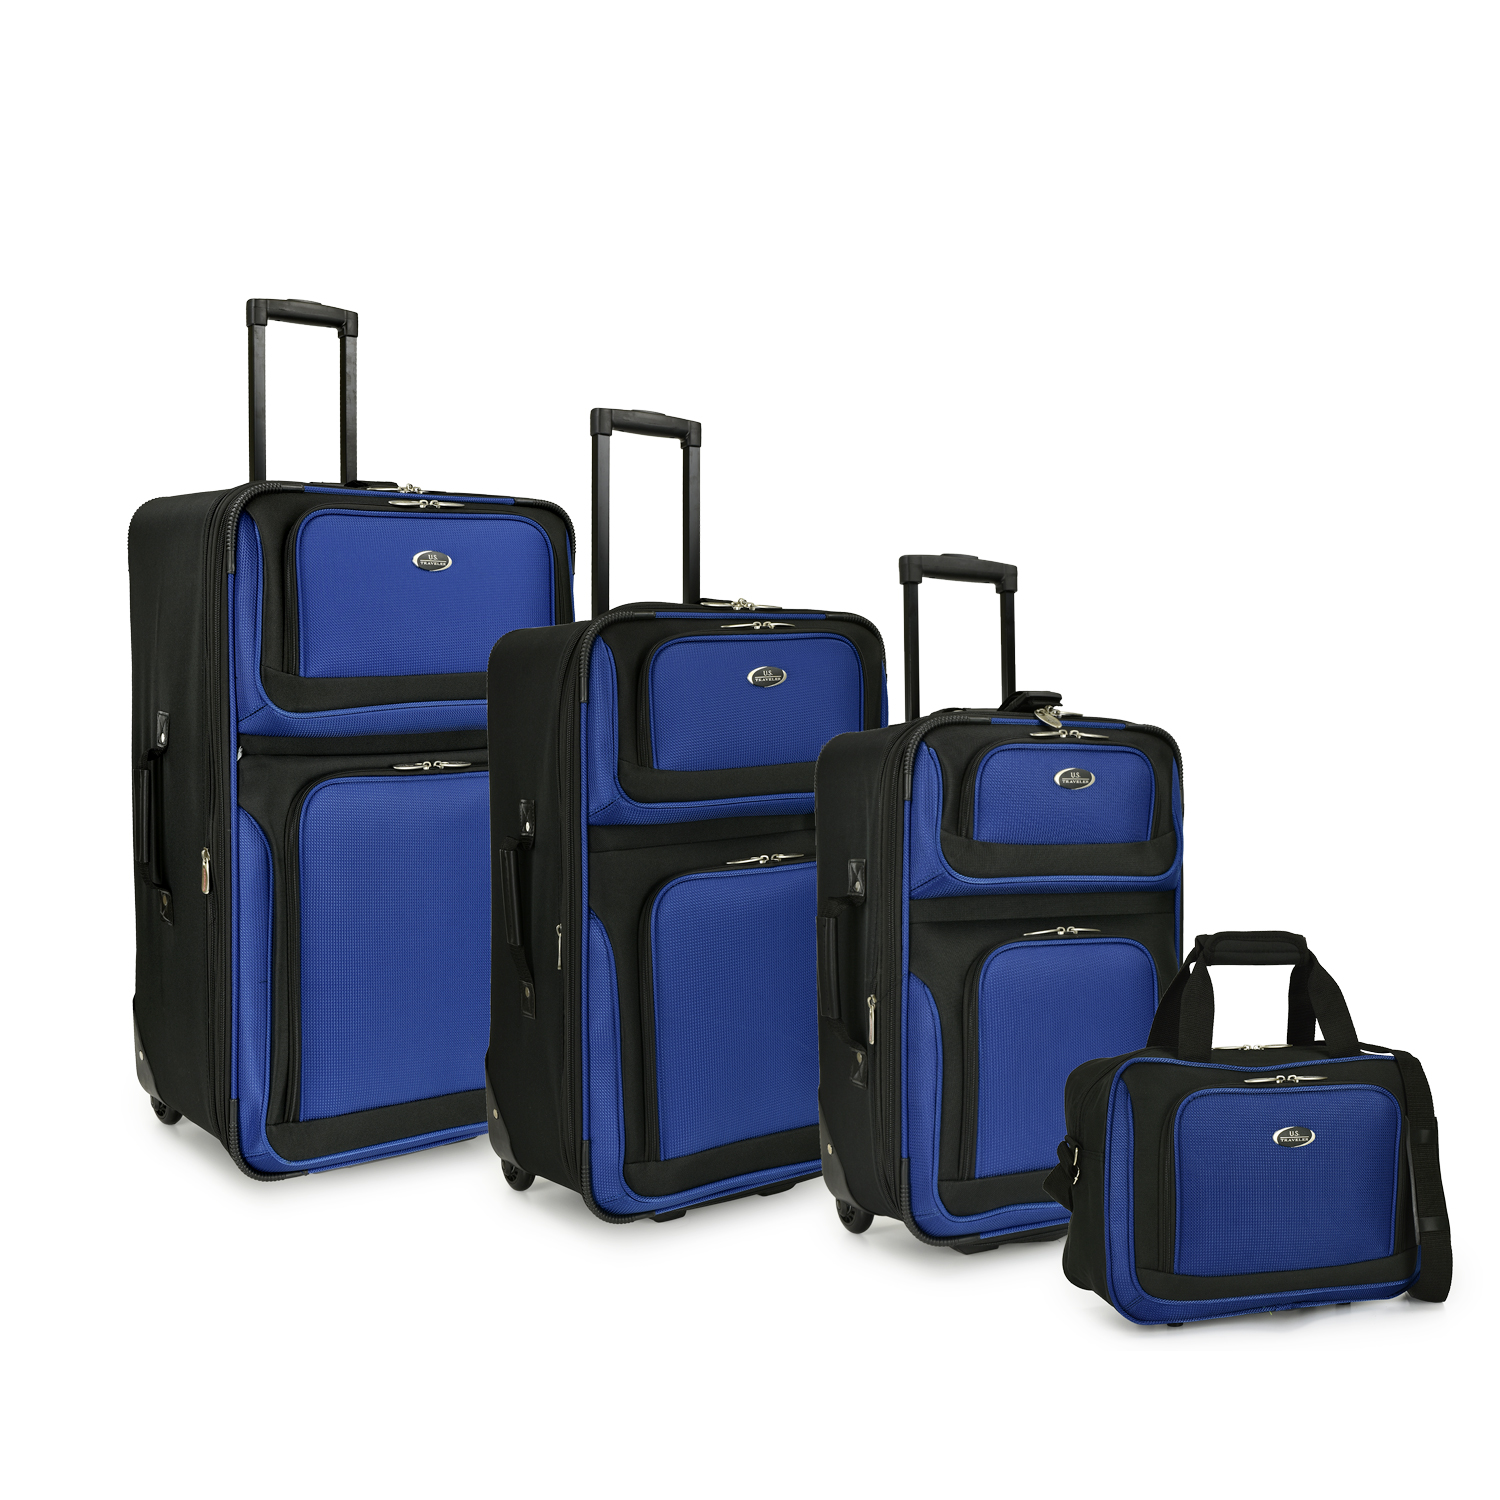 FULL COLOR CARRY-ON – Golden Pacific